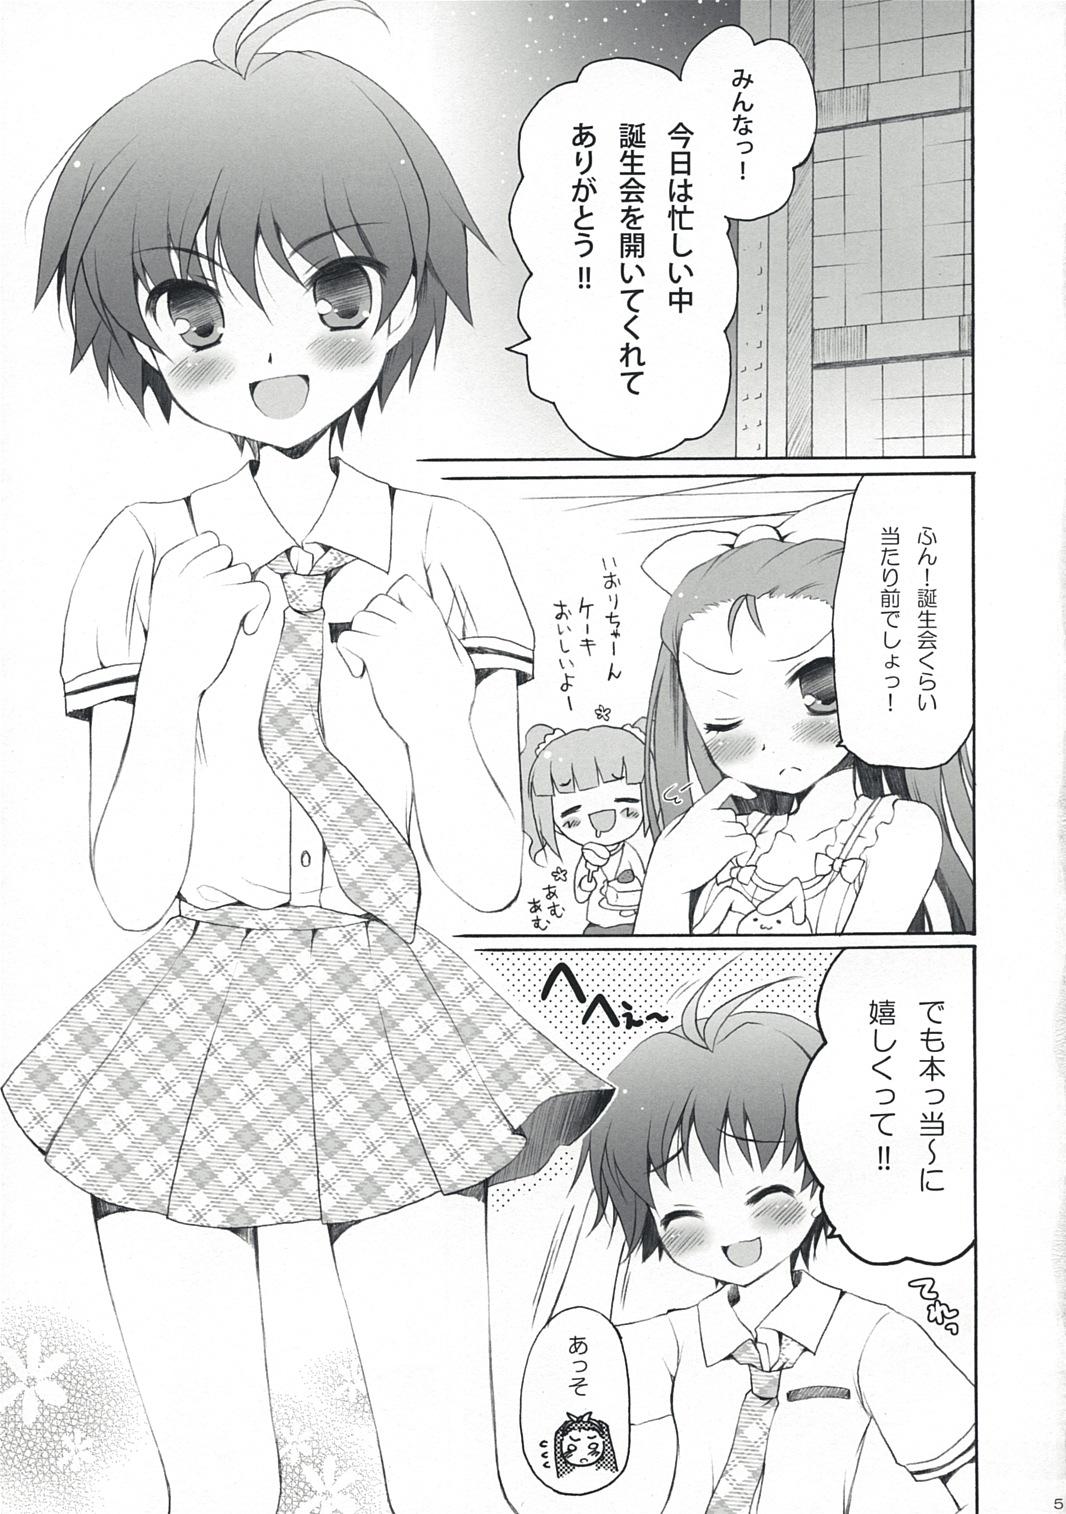 Culo goCCo - The idolmaster Gay Group - Page 4